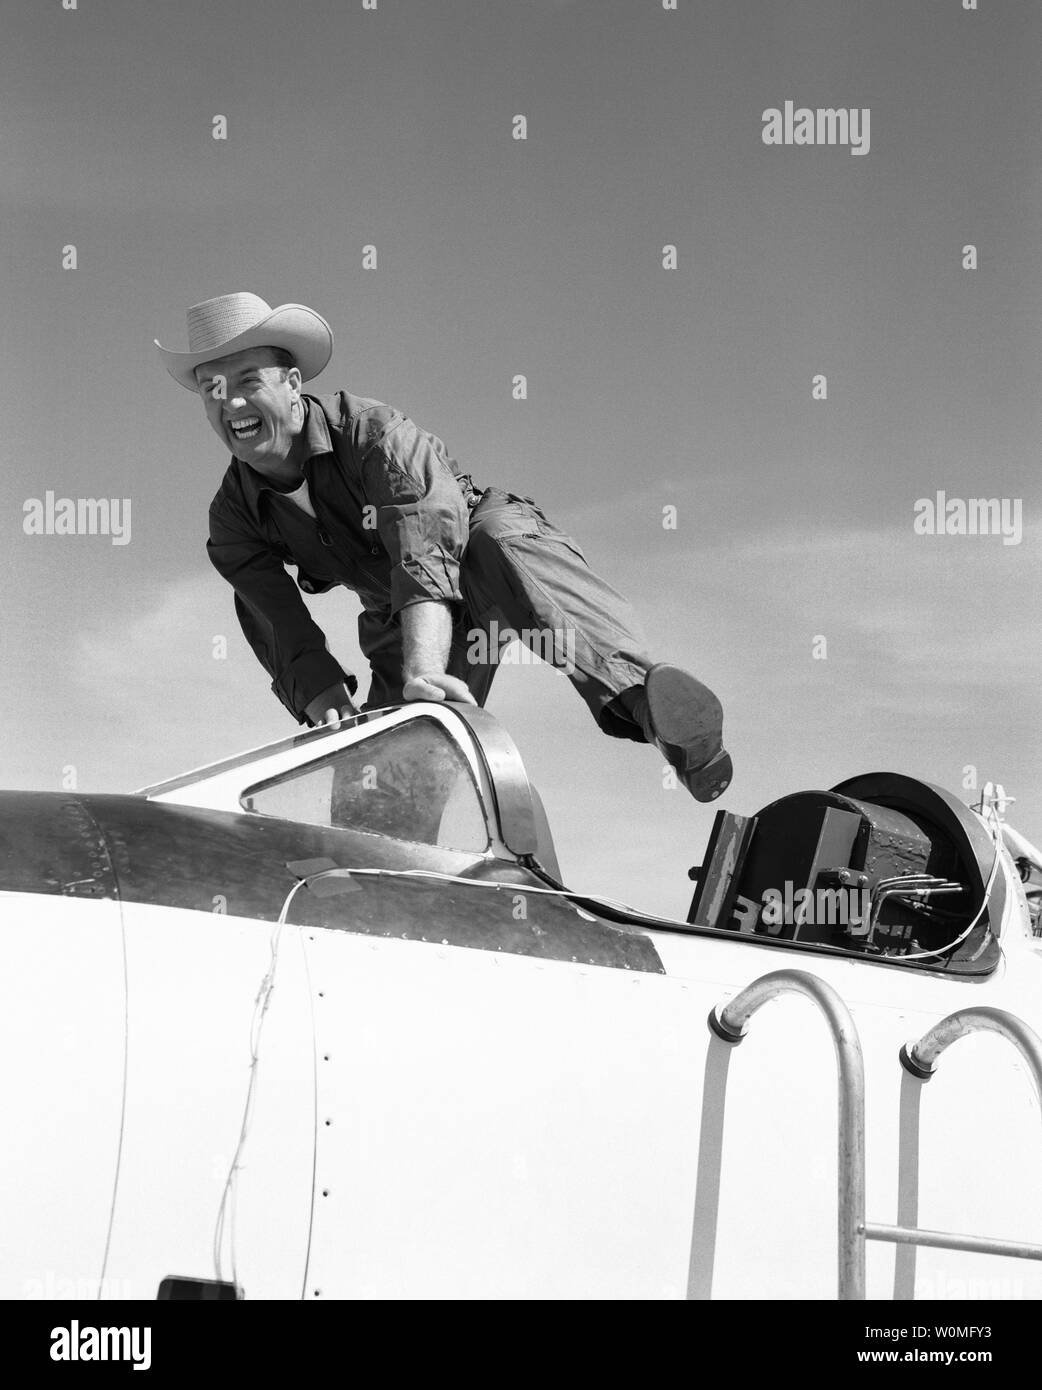 NACA High-Speed Flight Station test pilot Joseph 'Cowboy Joe' Walker leaps on the Bell Aircraft Corporation X-1A in 1955 at Edwards Air Force Base, California. The X-1A was flown six times by Bell Aircraft Company pilot Jean 'Skip' Ziegler in 1953. Air Force test pilots Maj. Charles 'Chuck' Yeager and Maj. Arthur 'Kit' Murray made 18 flights between 21 November 1953 and 26 August 1954. The X-1A was then turned over to the NACA. UPI/NASA Stock Photo